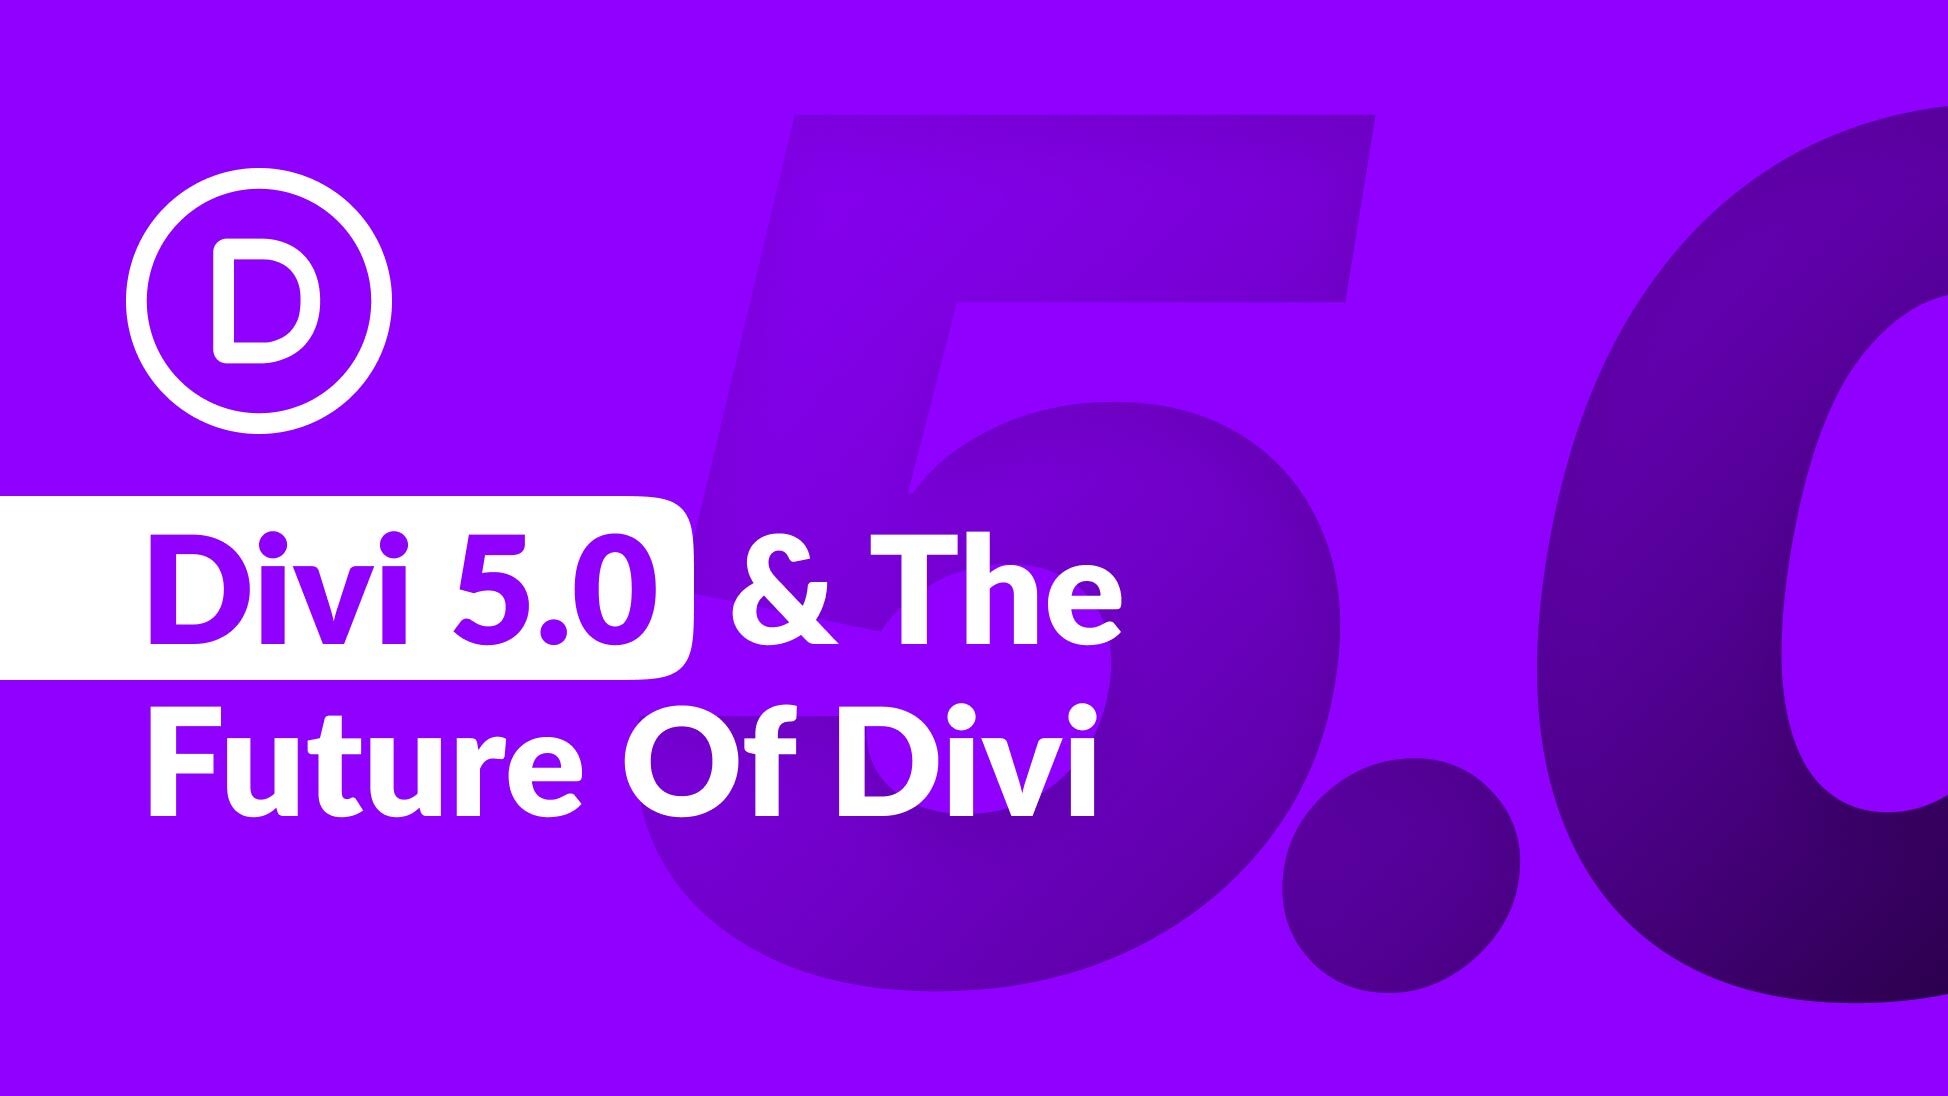 Let's Talk About Divi 5.0 And The Future Of Divi